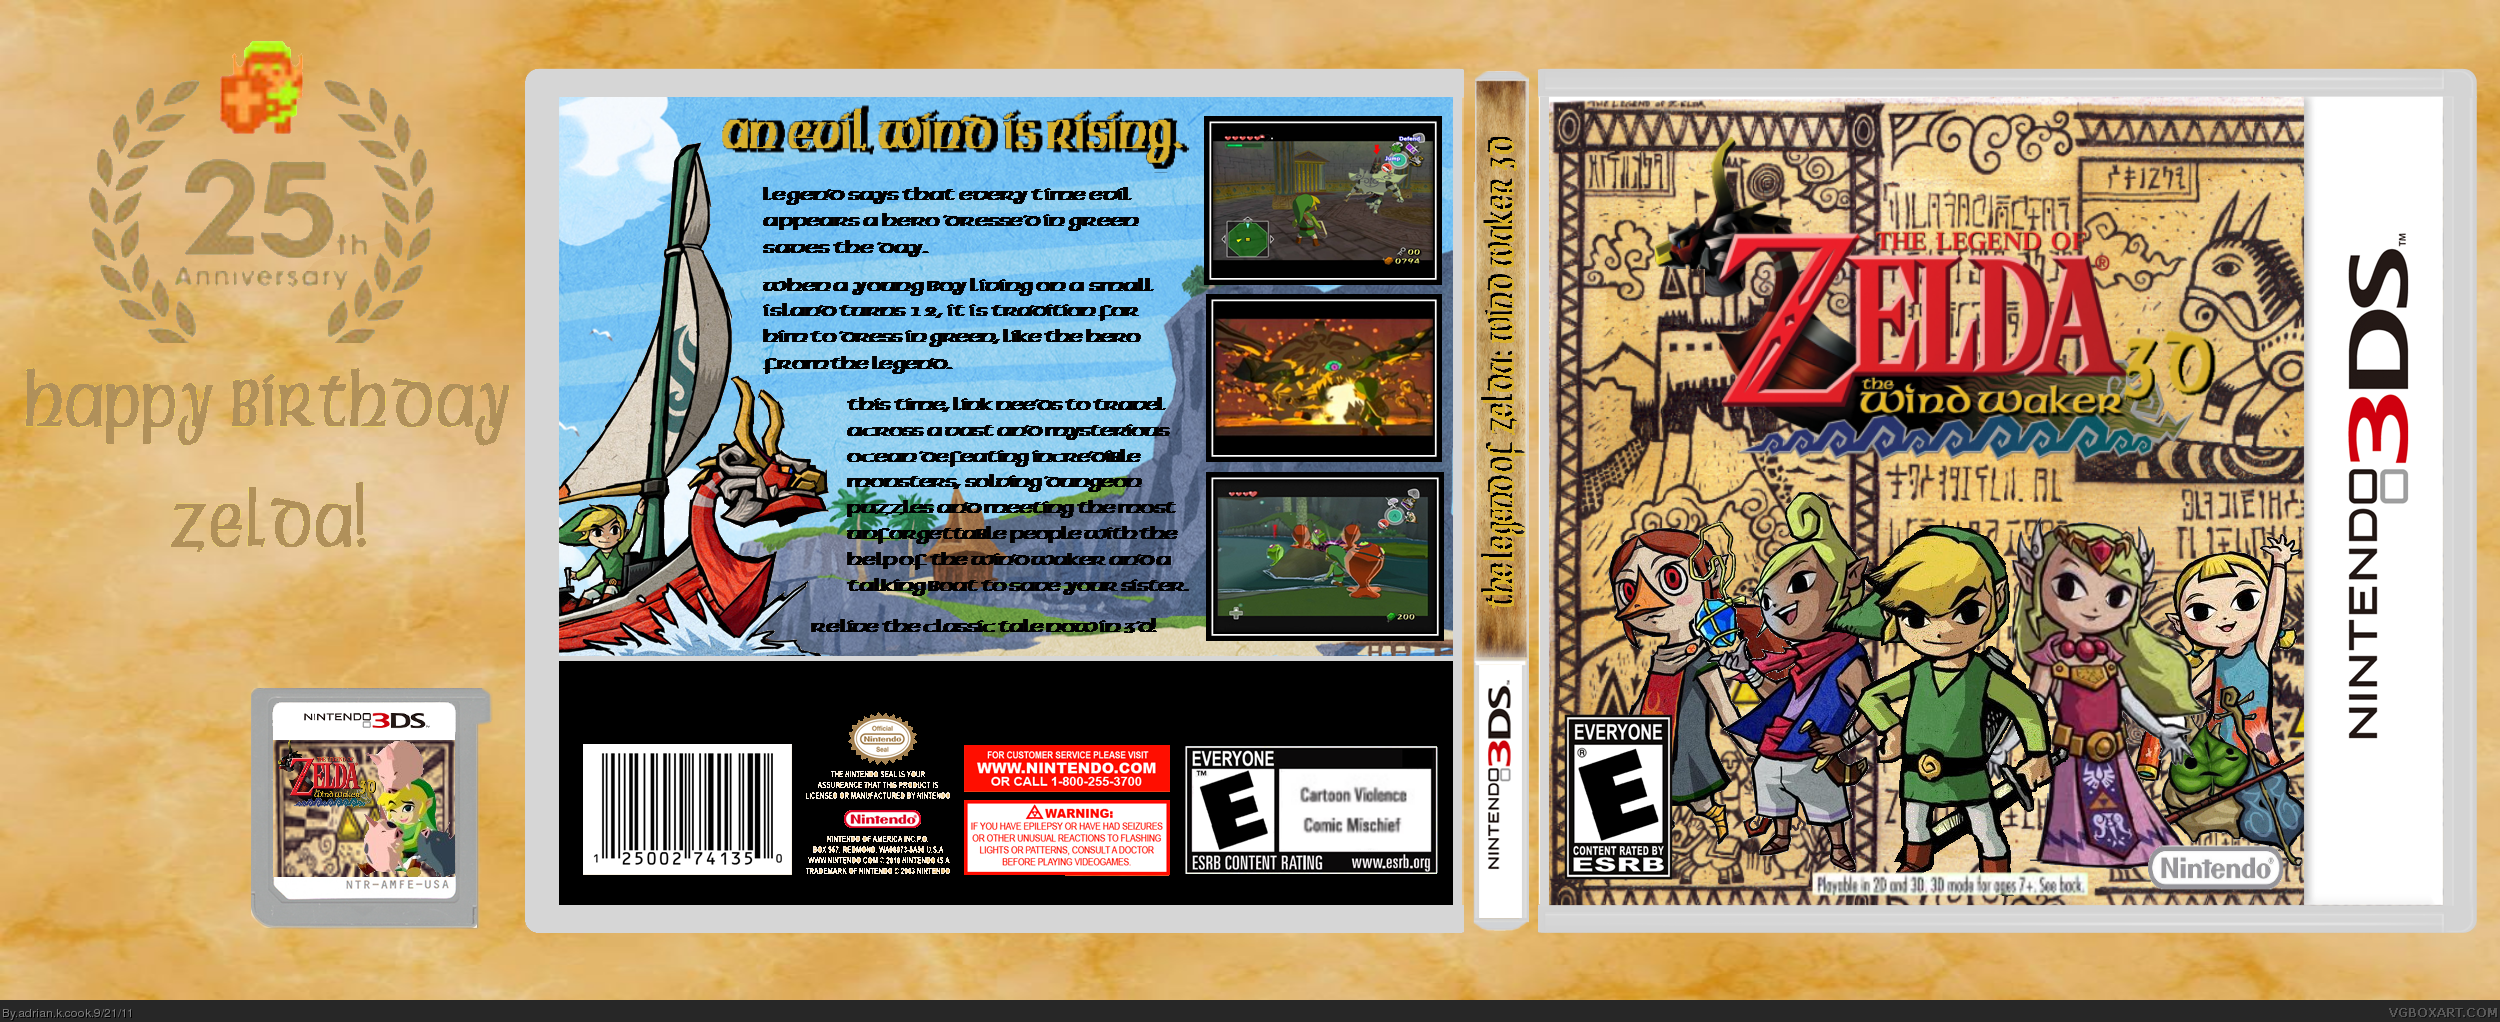 The Legend of Zelda: The Wind Waker 3D box cover